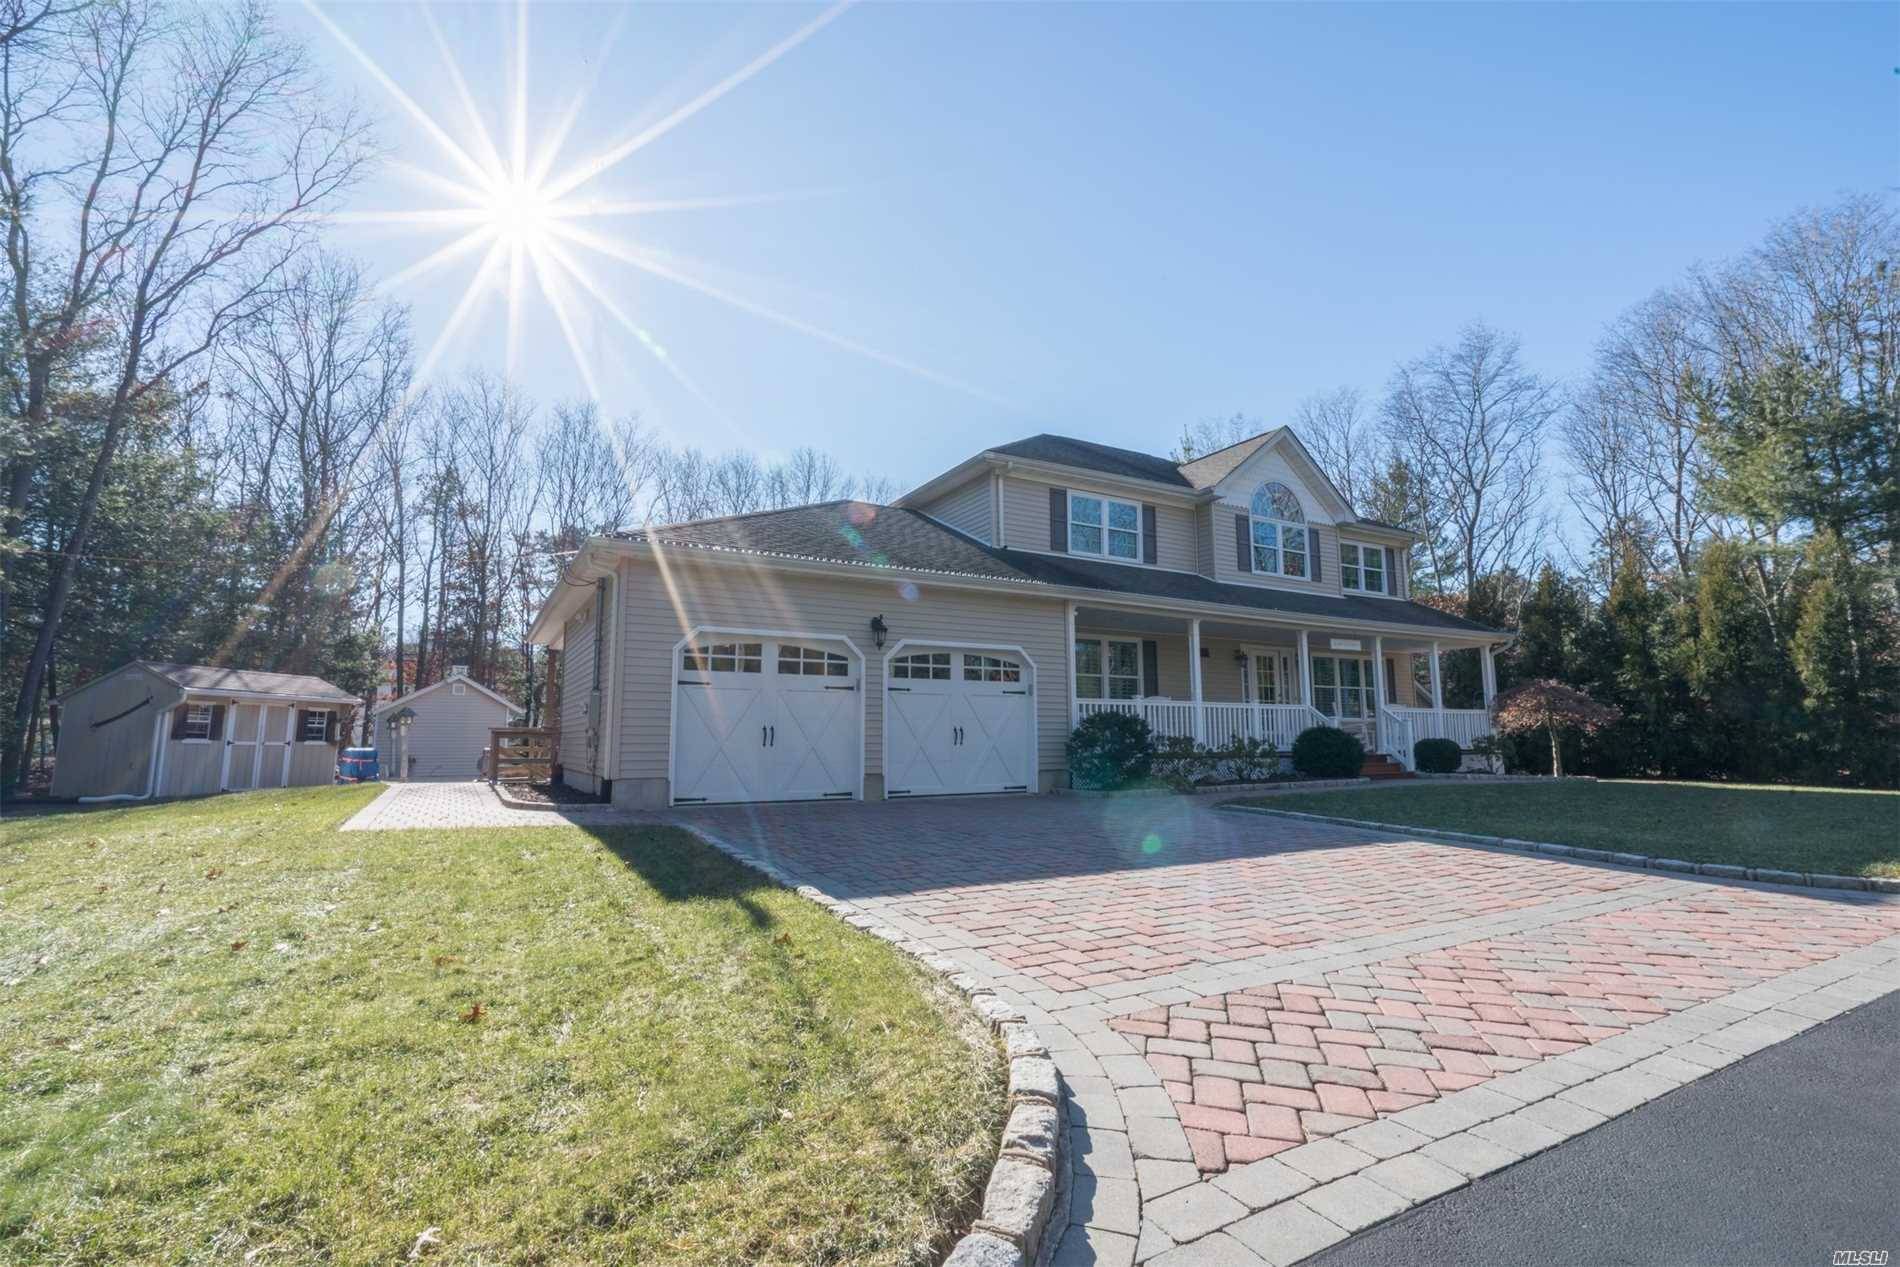 Nestled Away On A Quiet Treed Lane Lies This Amazing Turn-Key 4 Bedroom, 2.